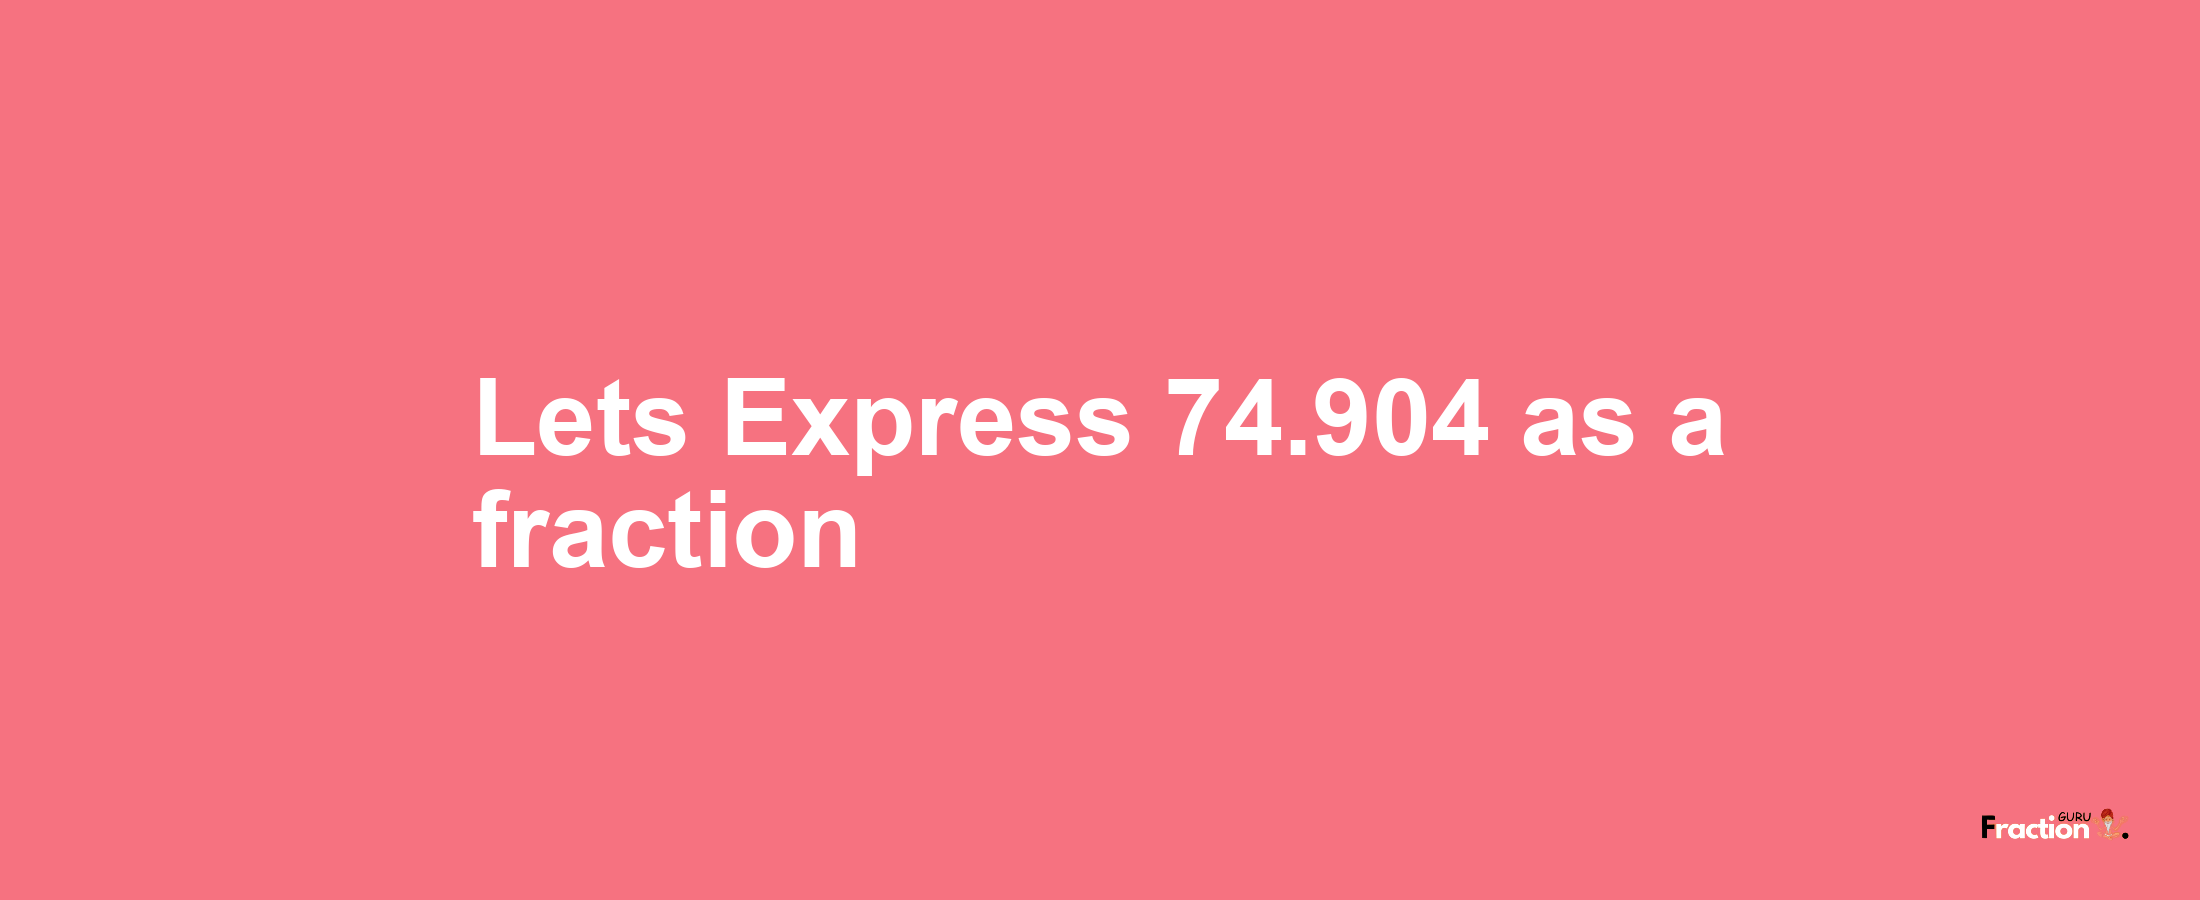 Lets Express 74.904 as afraction